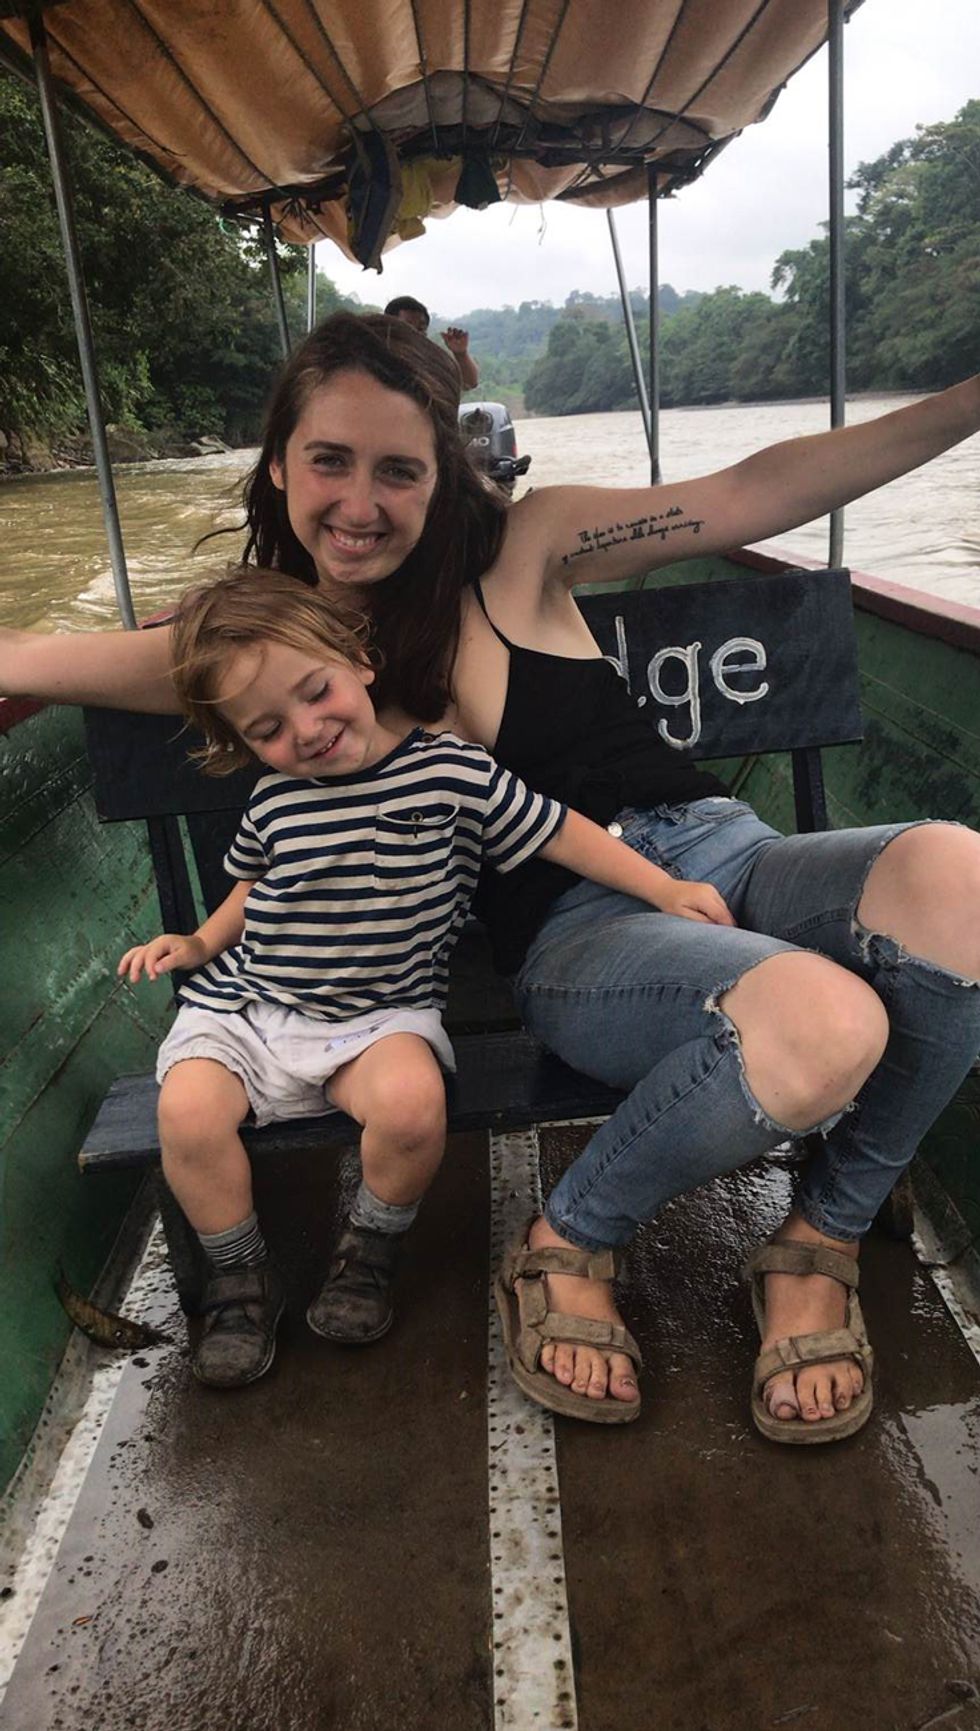 Vegan-Turned-Carnivore Defends Feeding Her Toddler Son The Same Diet Of Organs And Bone Marrow